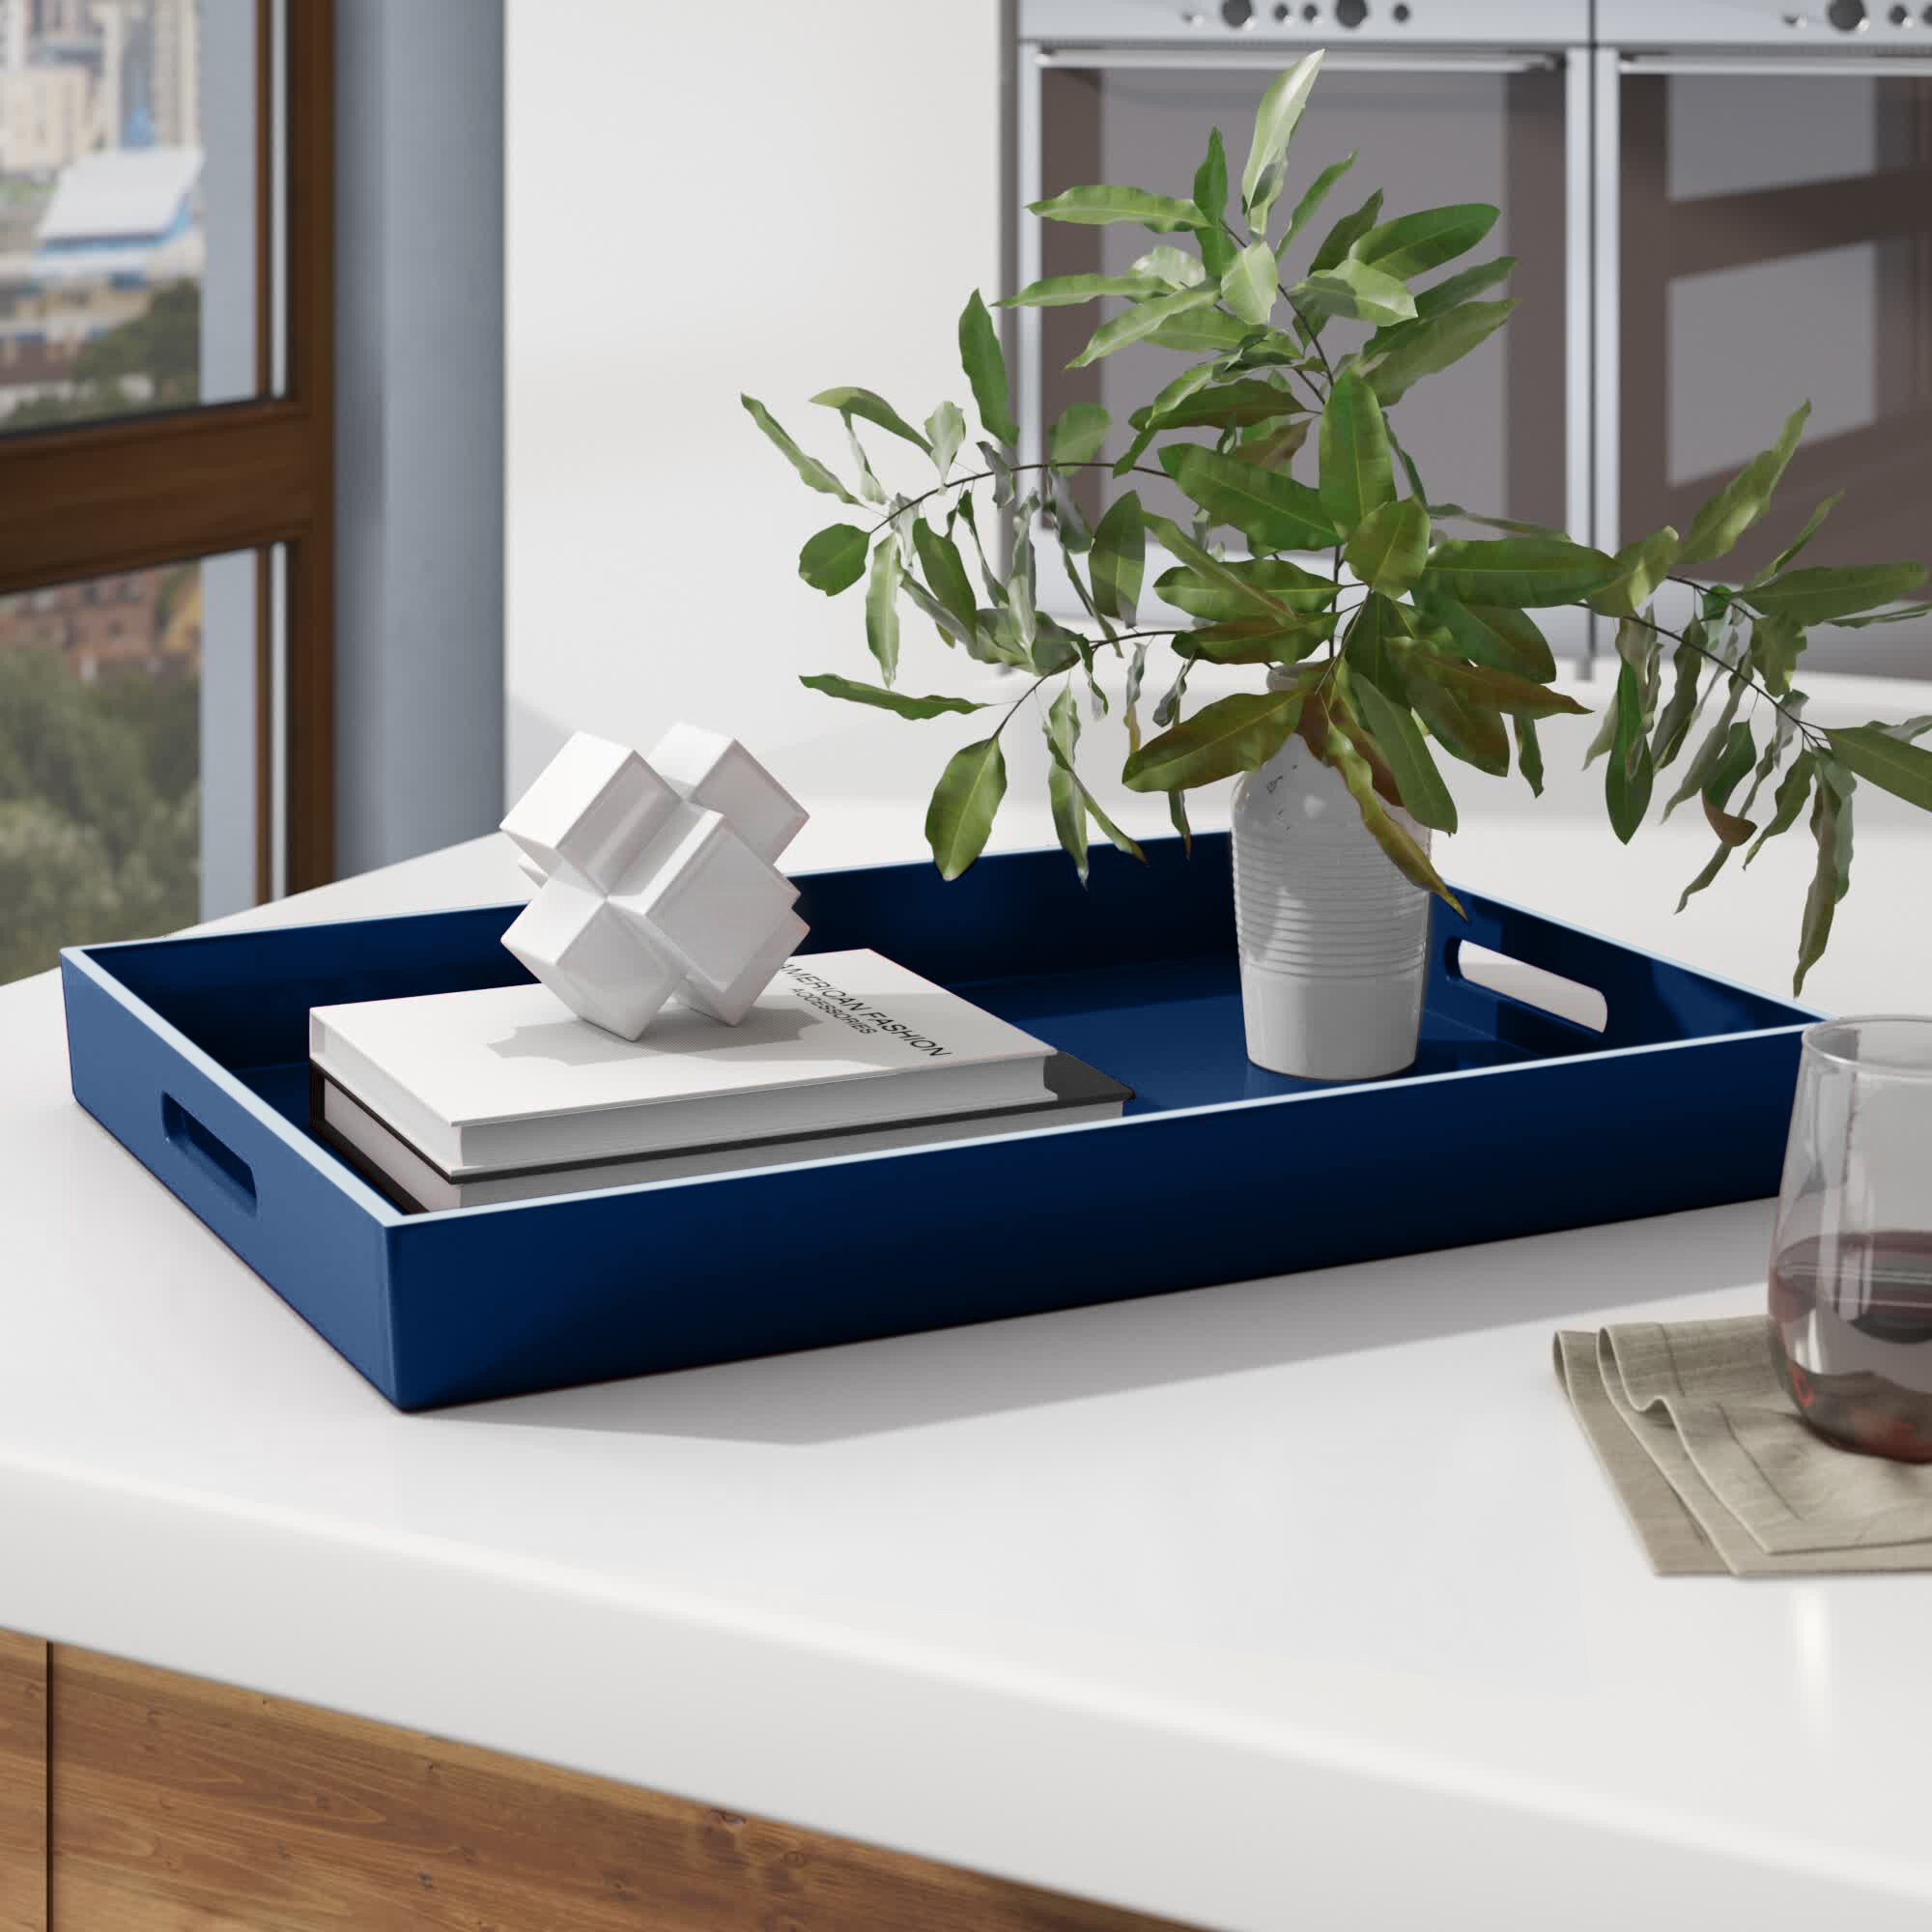 Decorative Trays For Less 